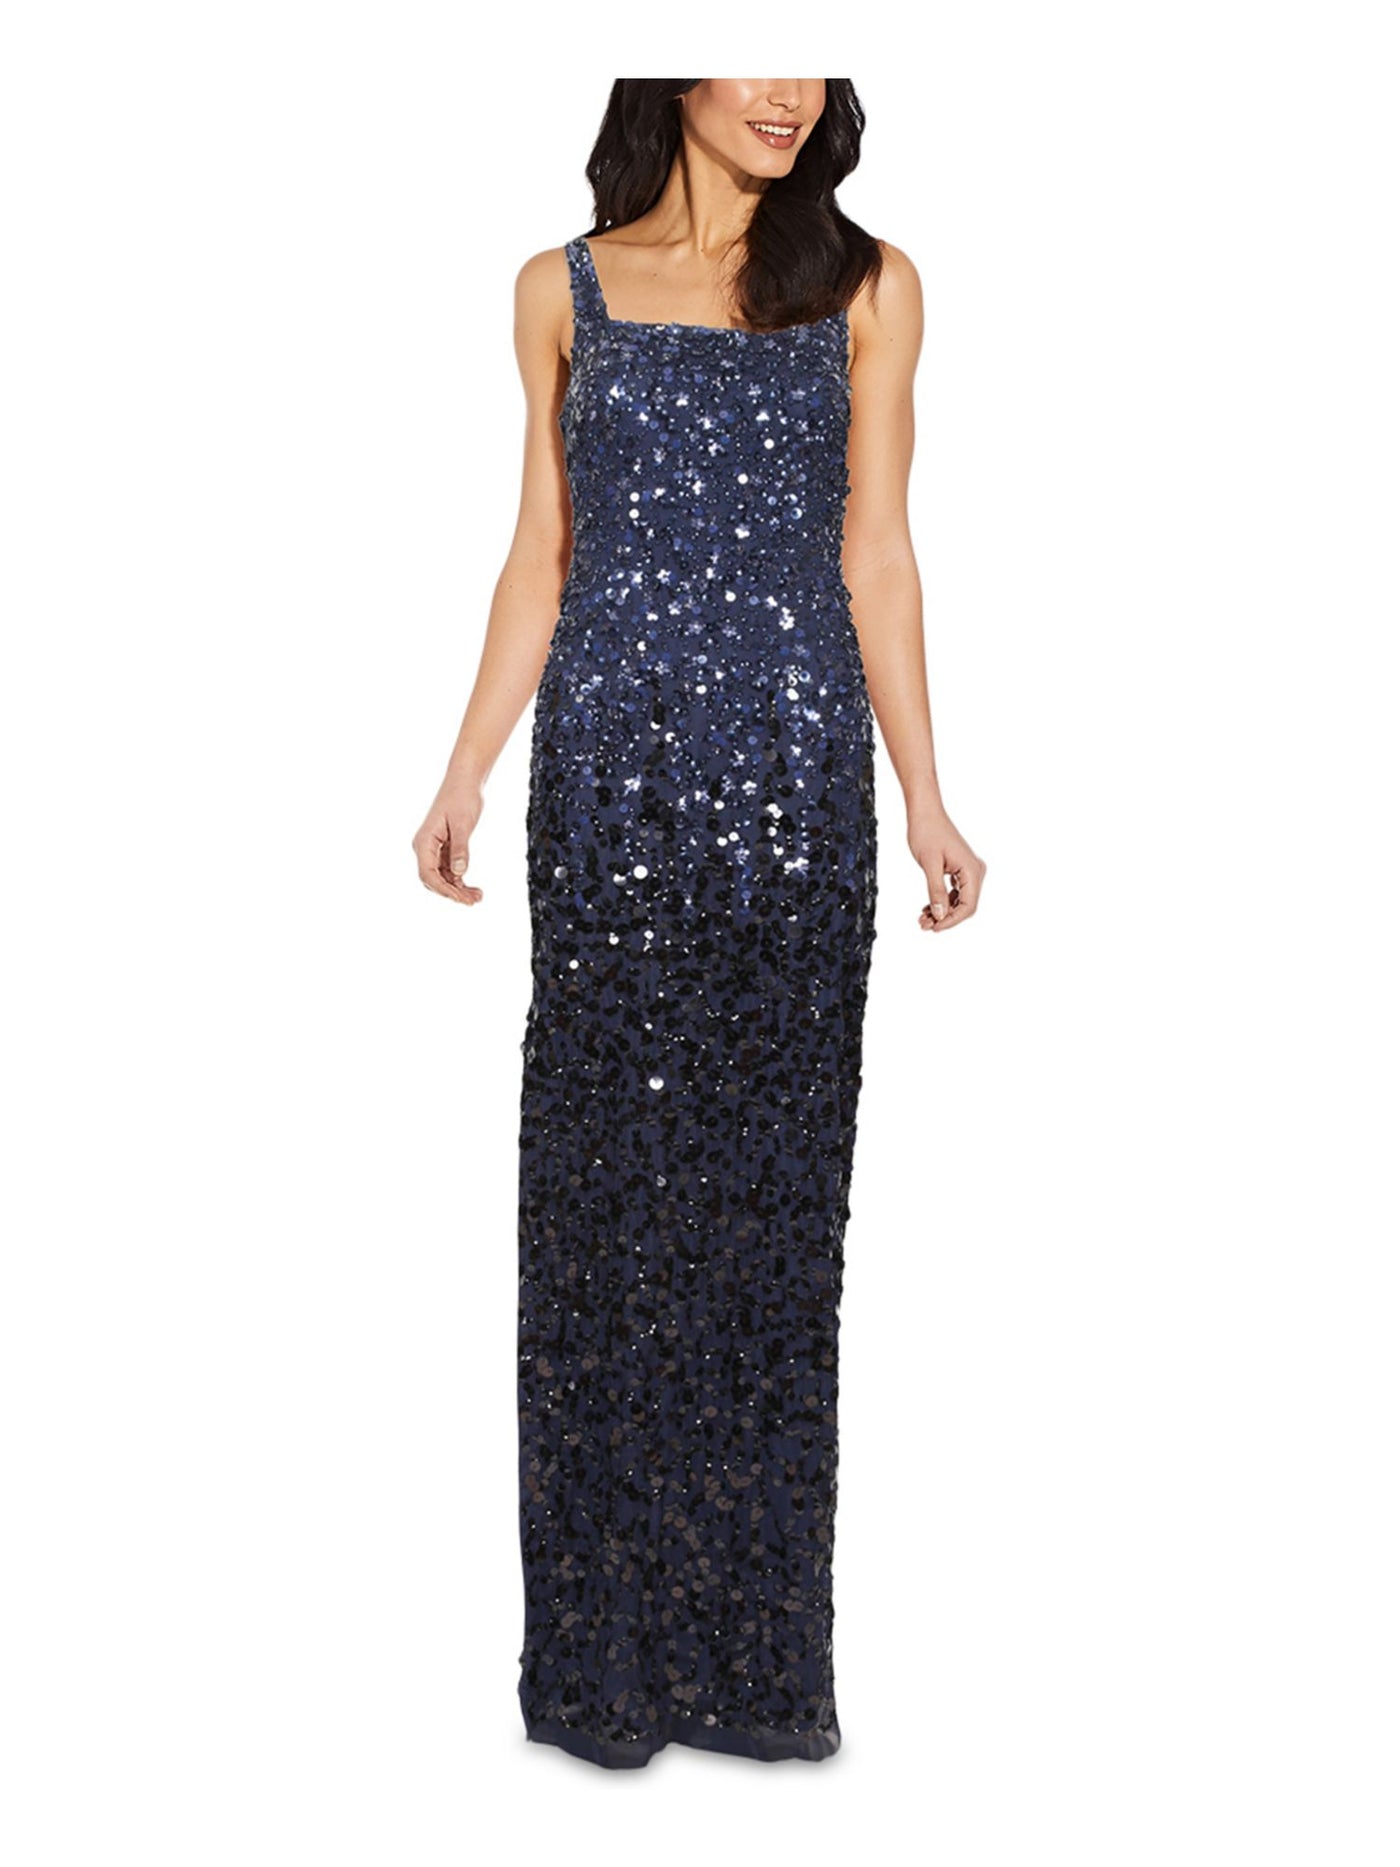 ADRIANNA PAPELL Womens Navy Stretch Sequined Zippered Slitted Lined Sleeveless Square Neck Full-Length Formal Gown Dress 6